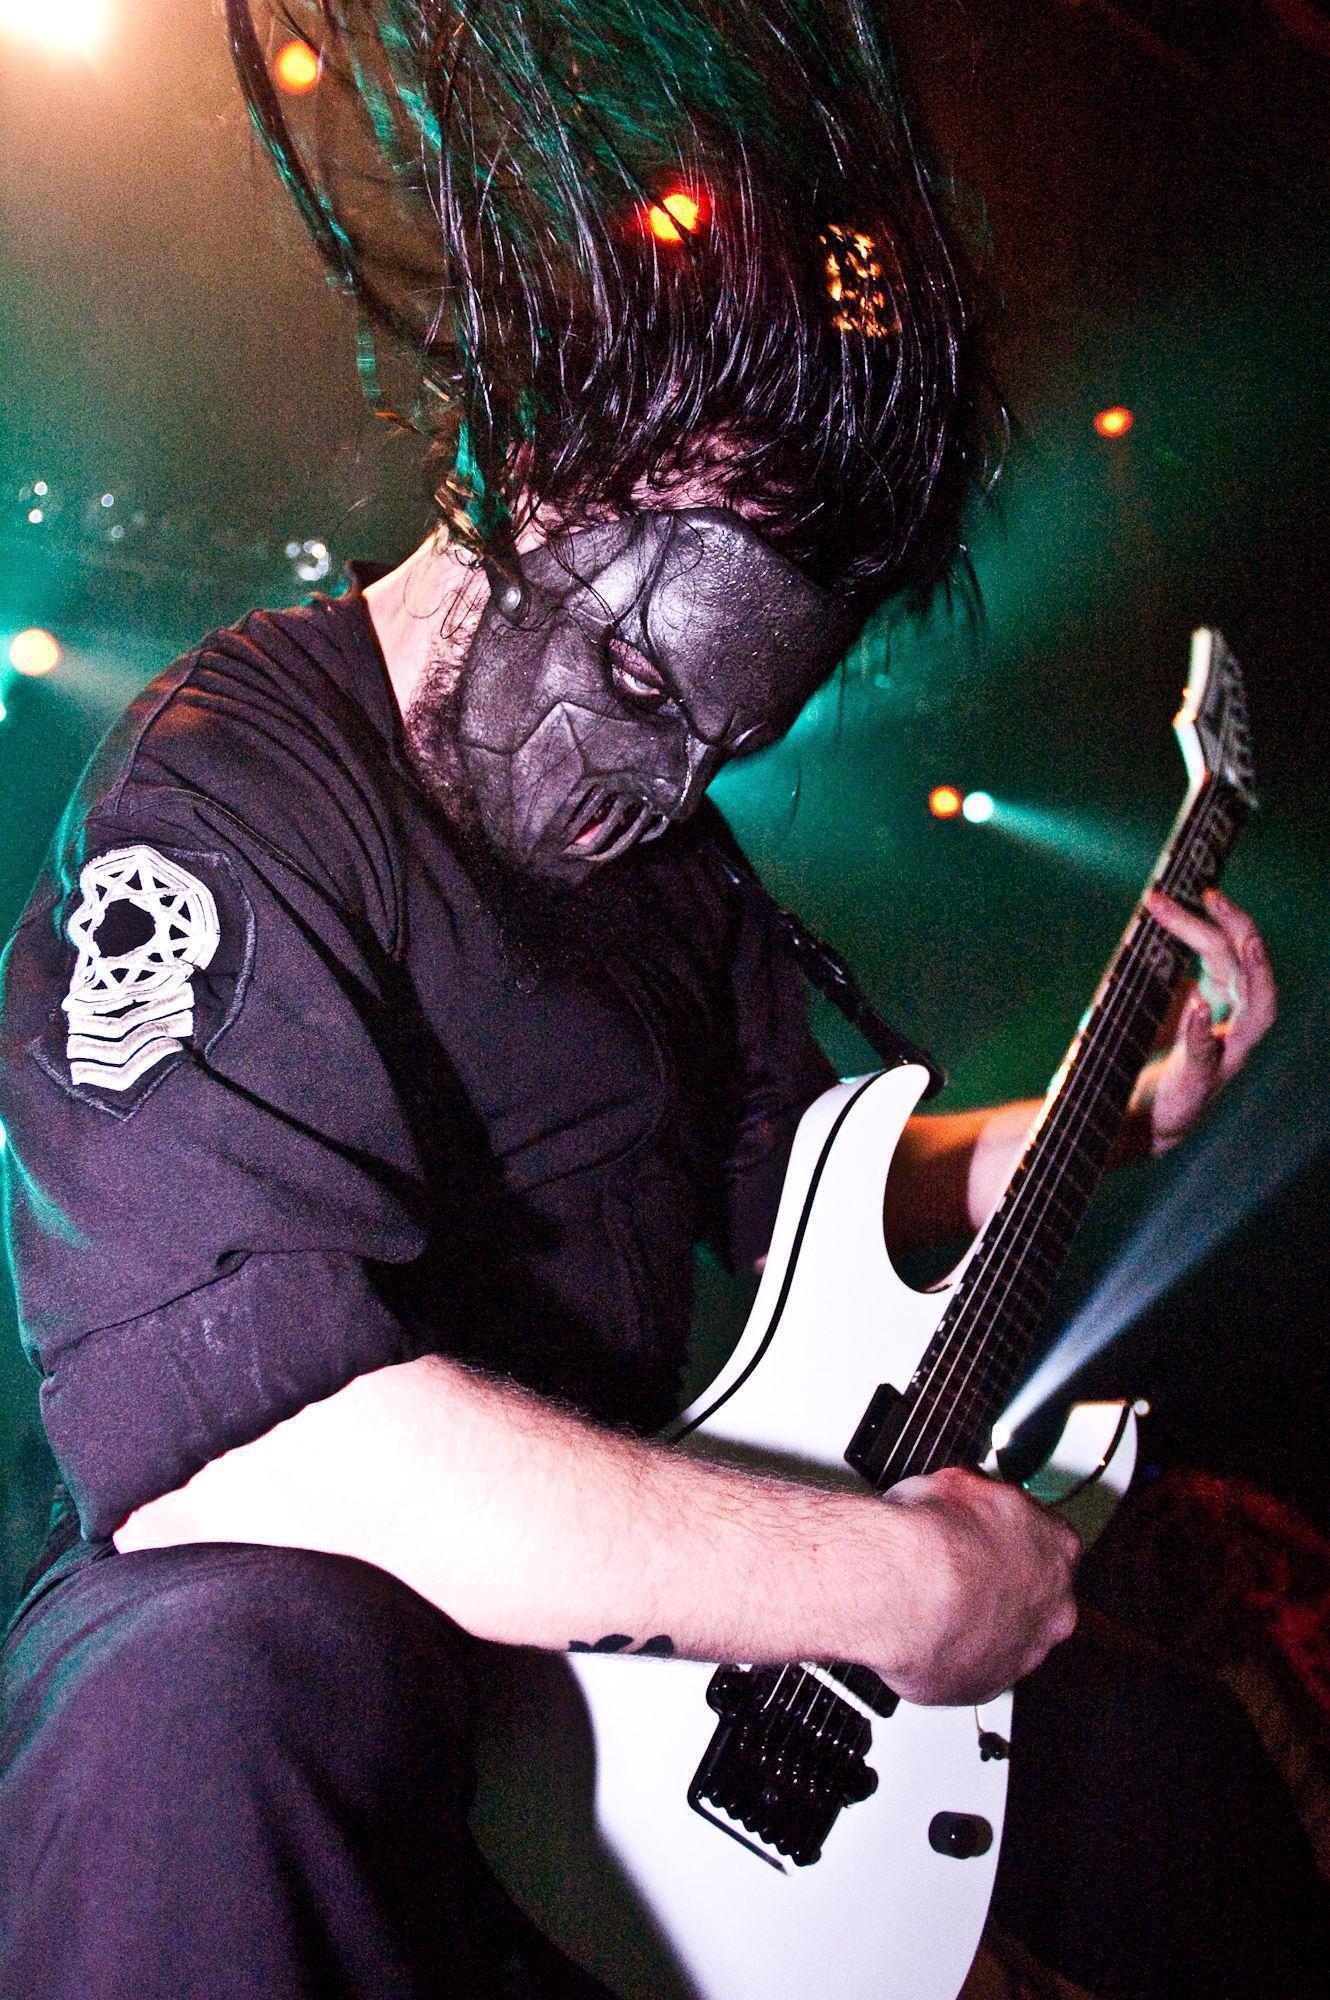 Slipknot Guitarist Mick Thomson Stabbed In Head By Brother